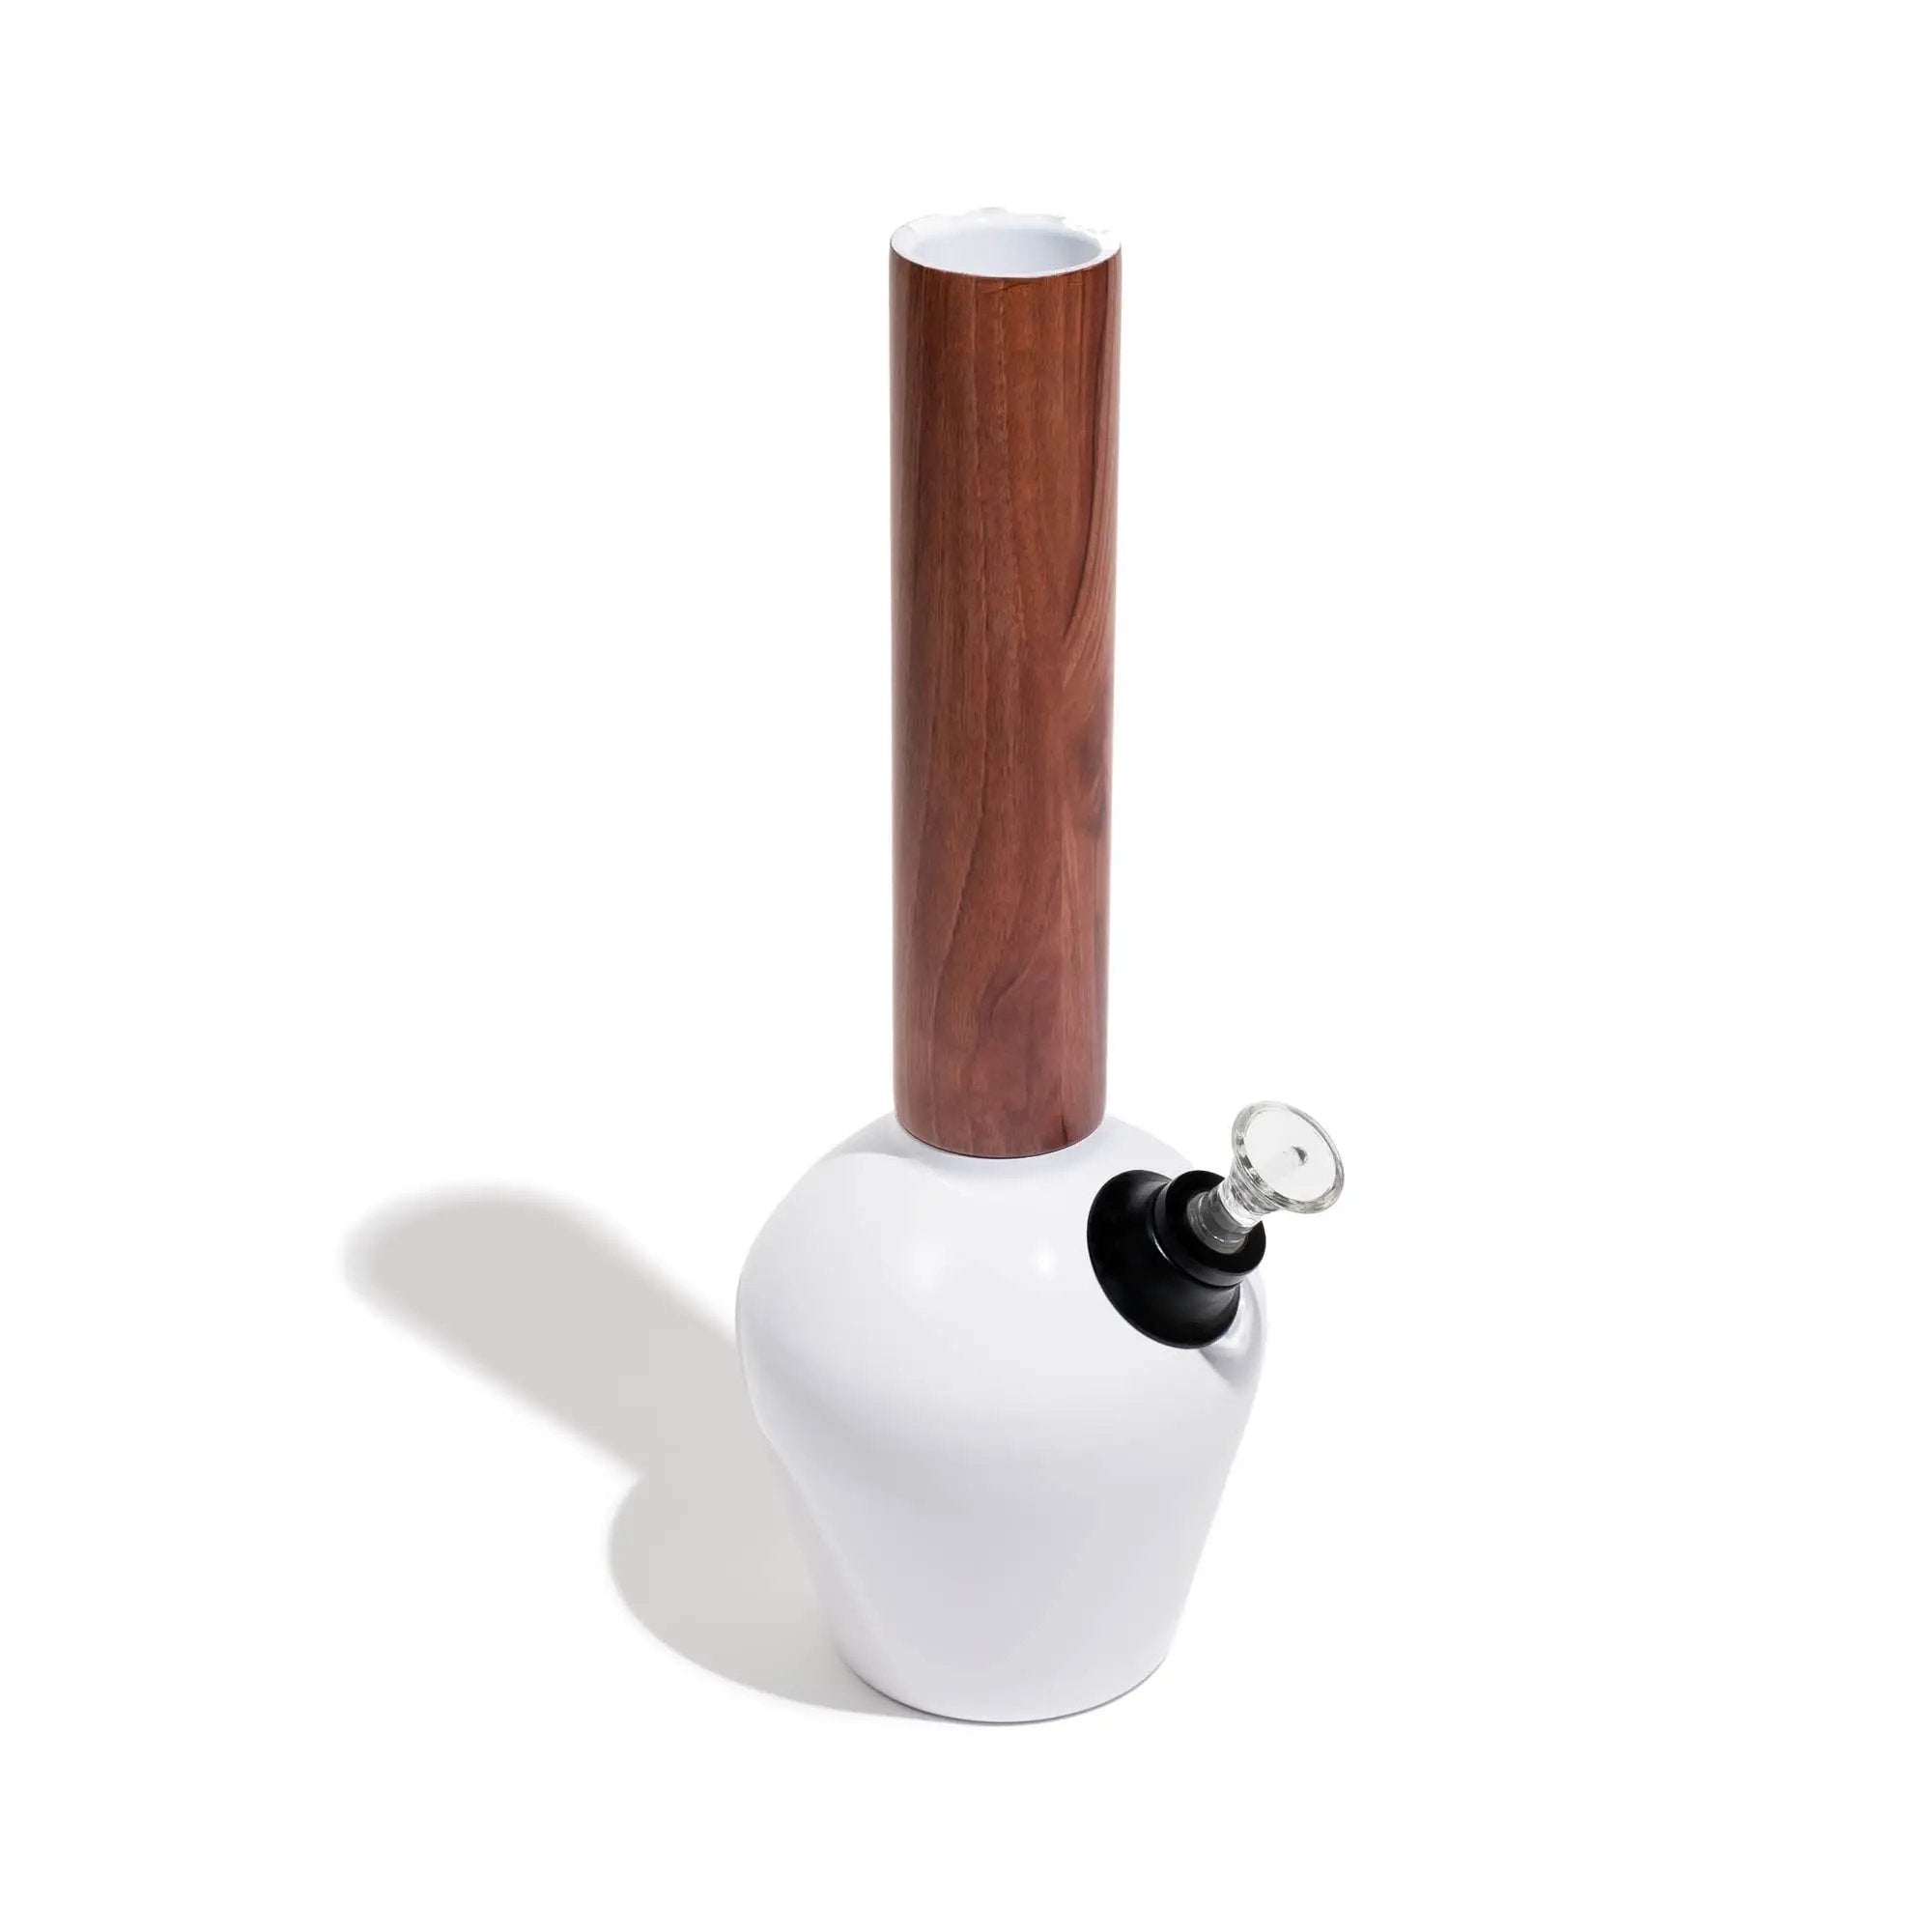 Gloss White & Cherry Wood Combo by Chill Steel Pipes